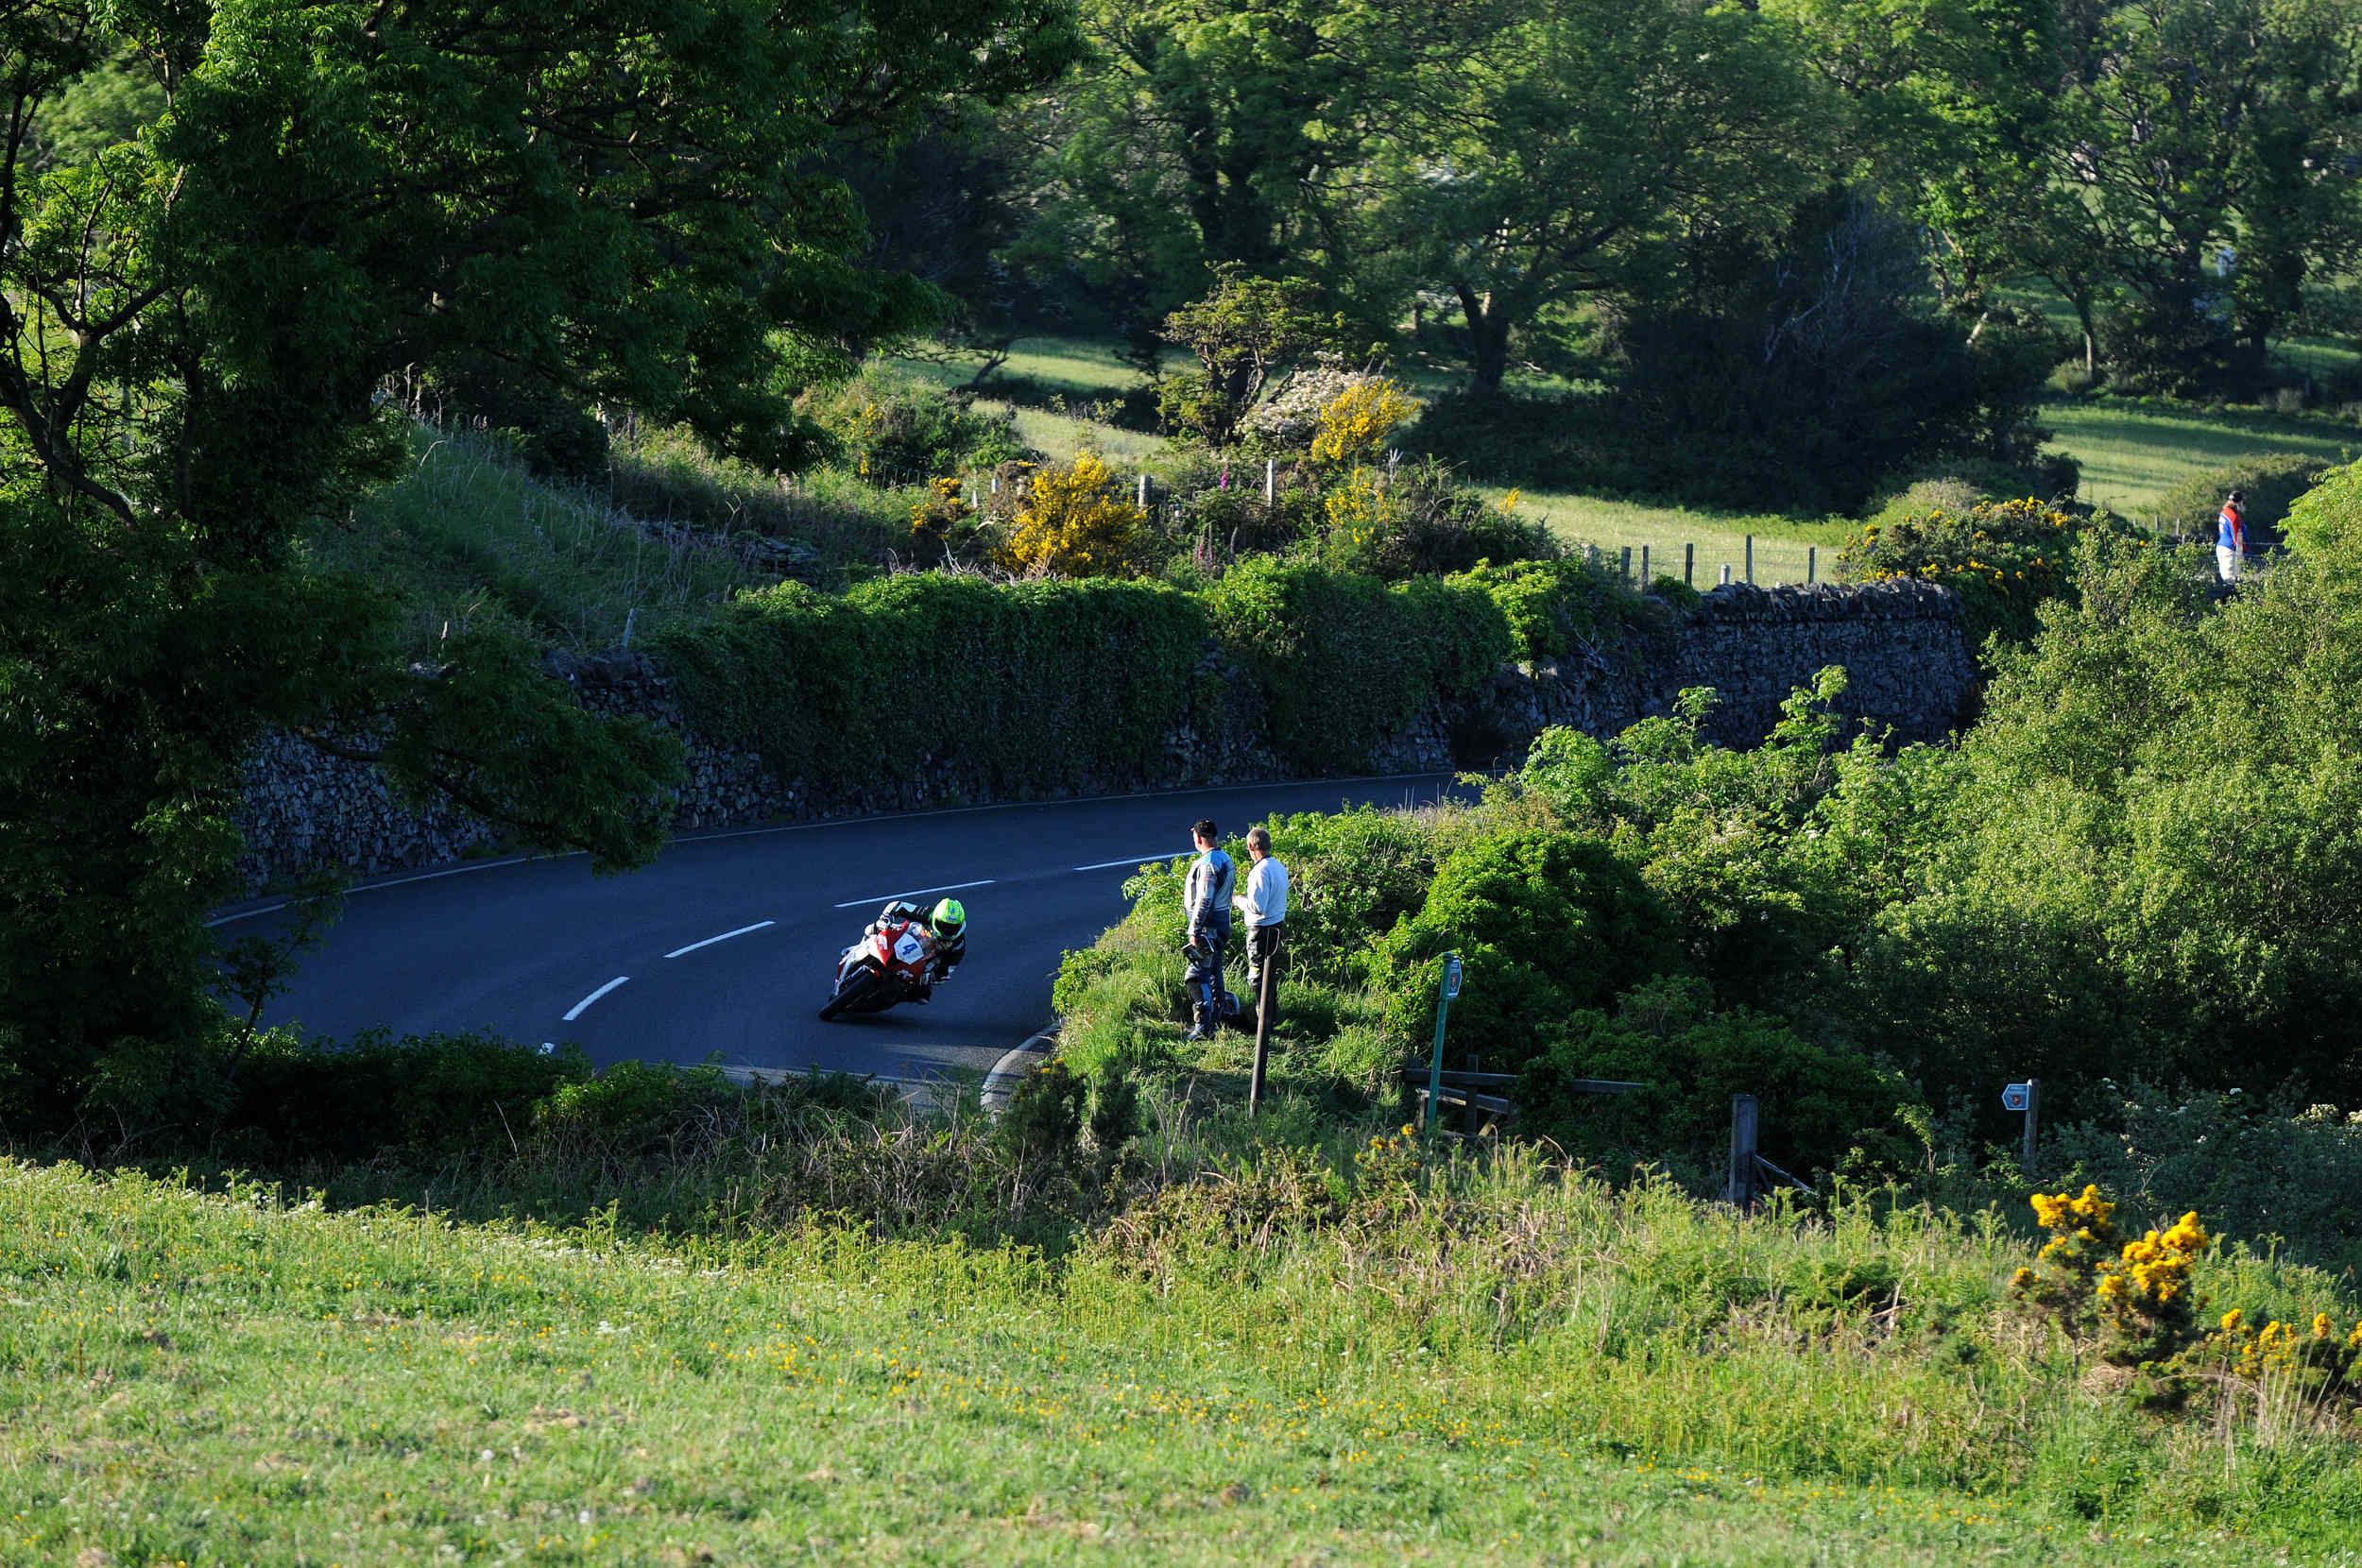  Cameron Donald at Tower Bends, TT qualifying 2012 